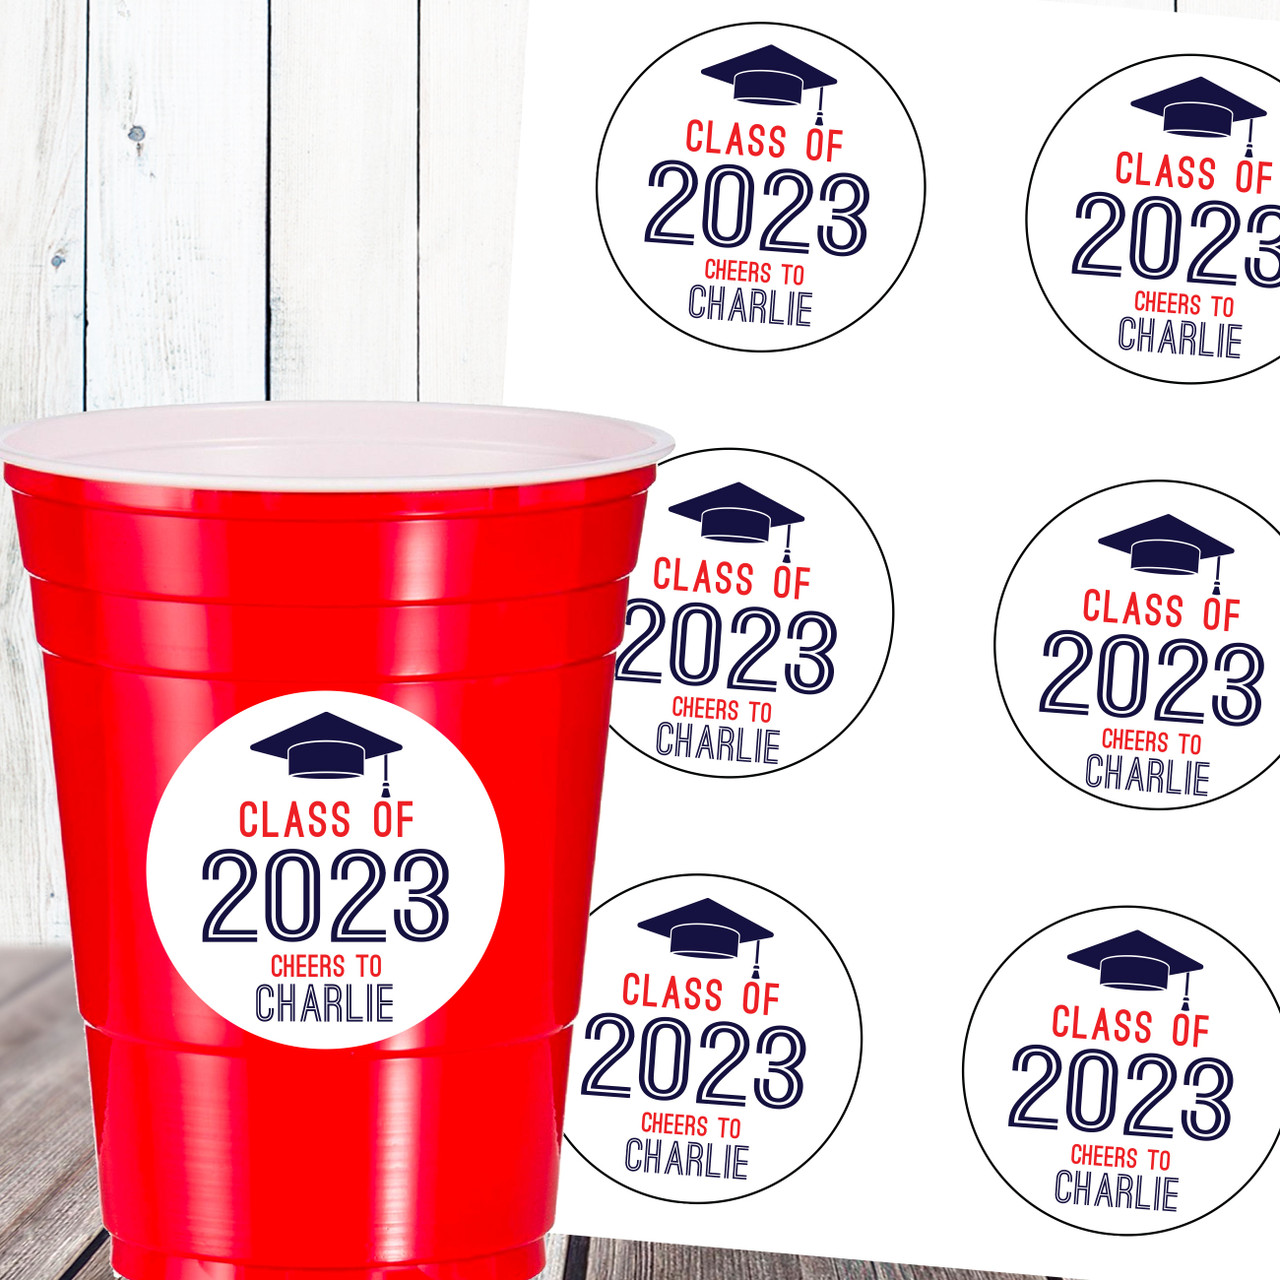 https://cdn11.bigcommerce.com/s-5grzuu6/images/stencil/1280x1280/products/6107/52955/Class_of_2023_Graduation-Party_Favor_Cup-Decals_Personalized__13887.1675797031.jpg?c=2